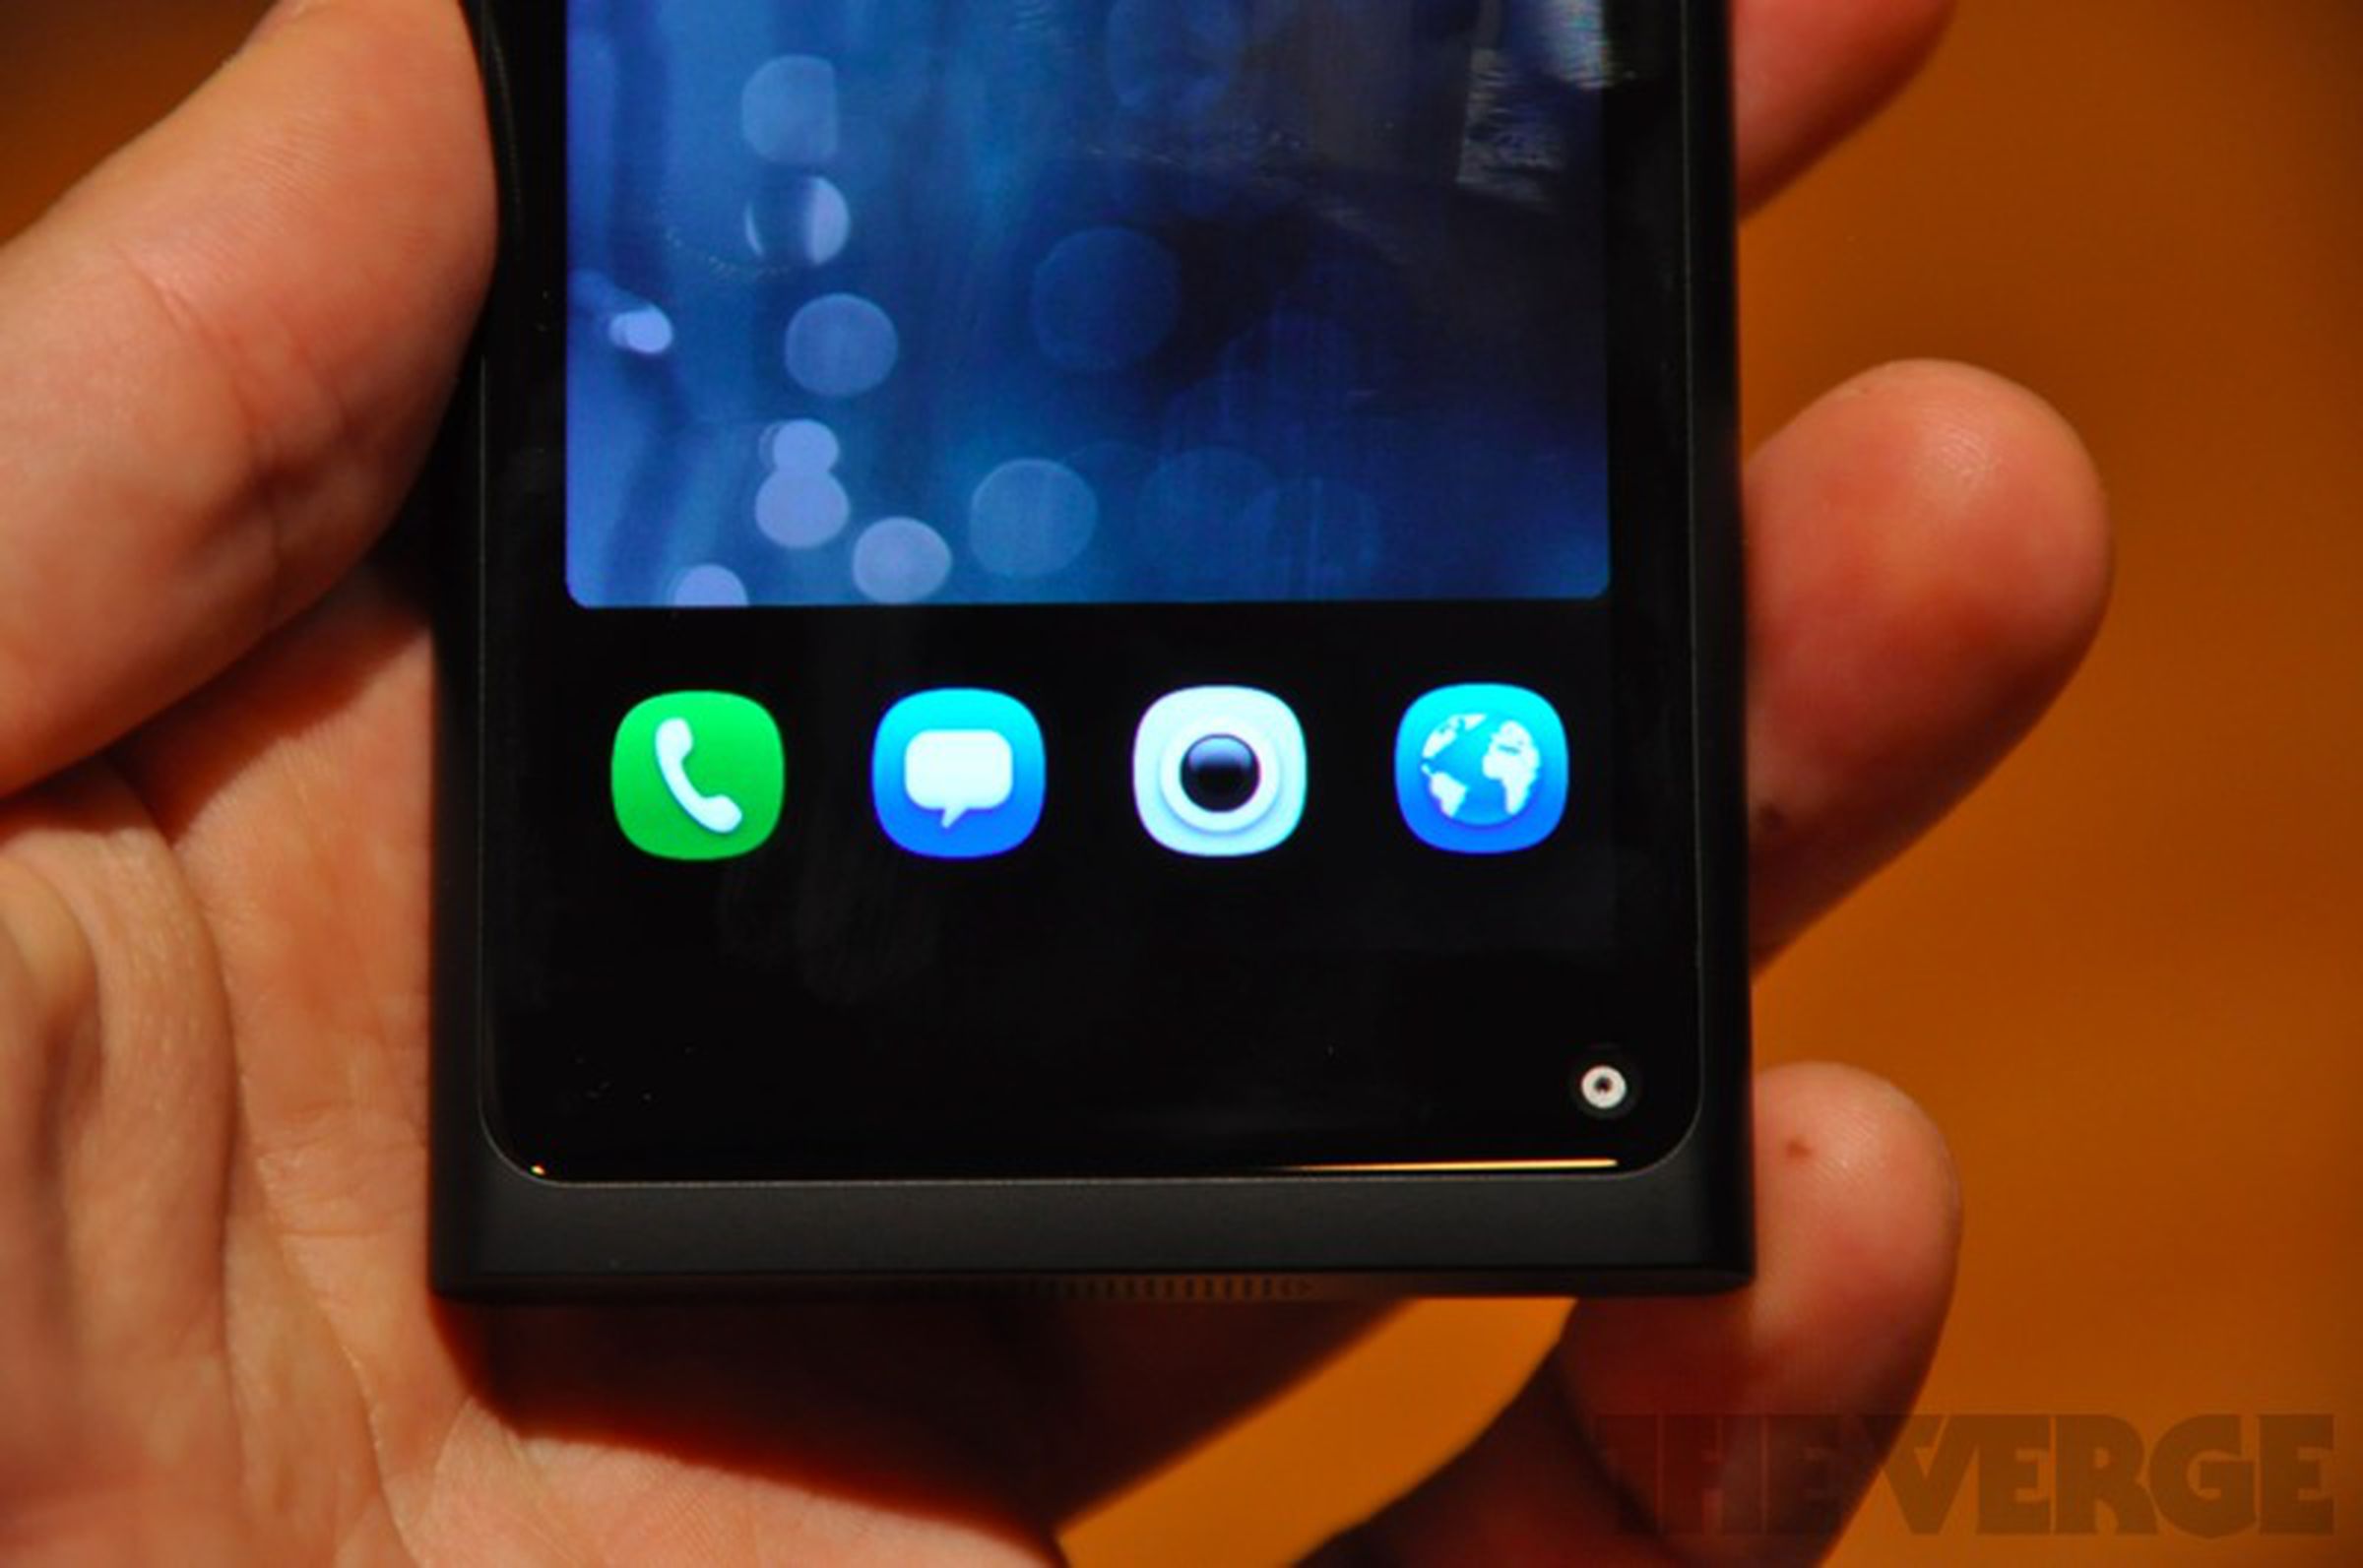 Nokia n9 review pictures